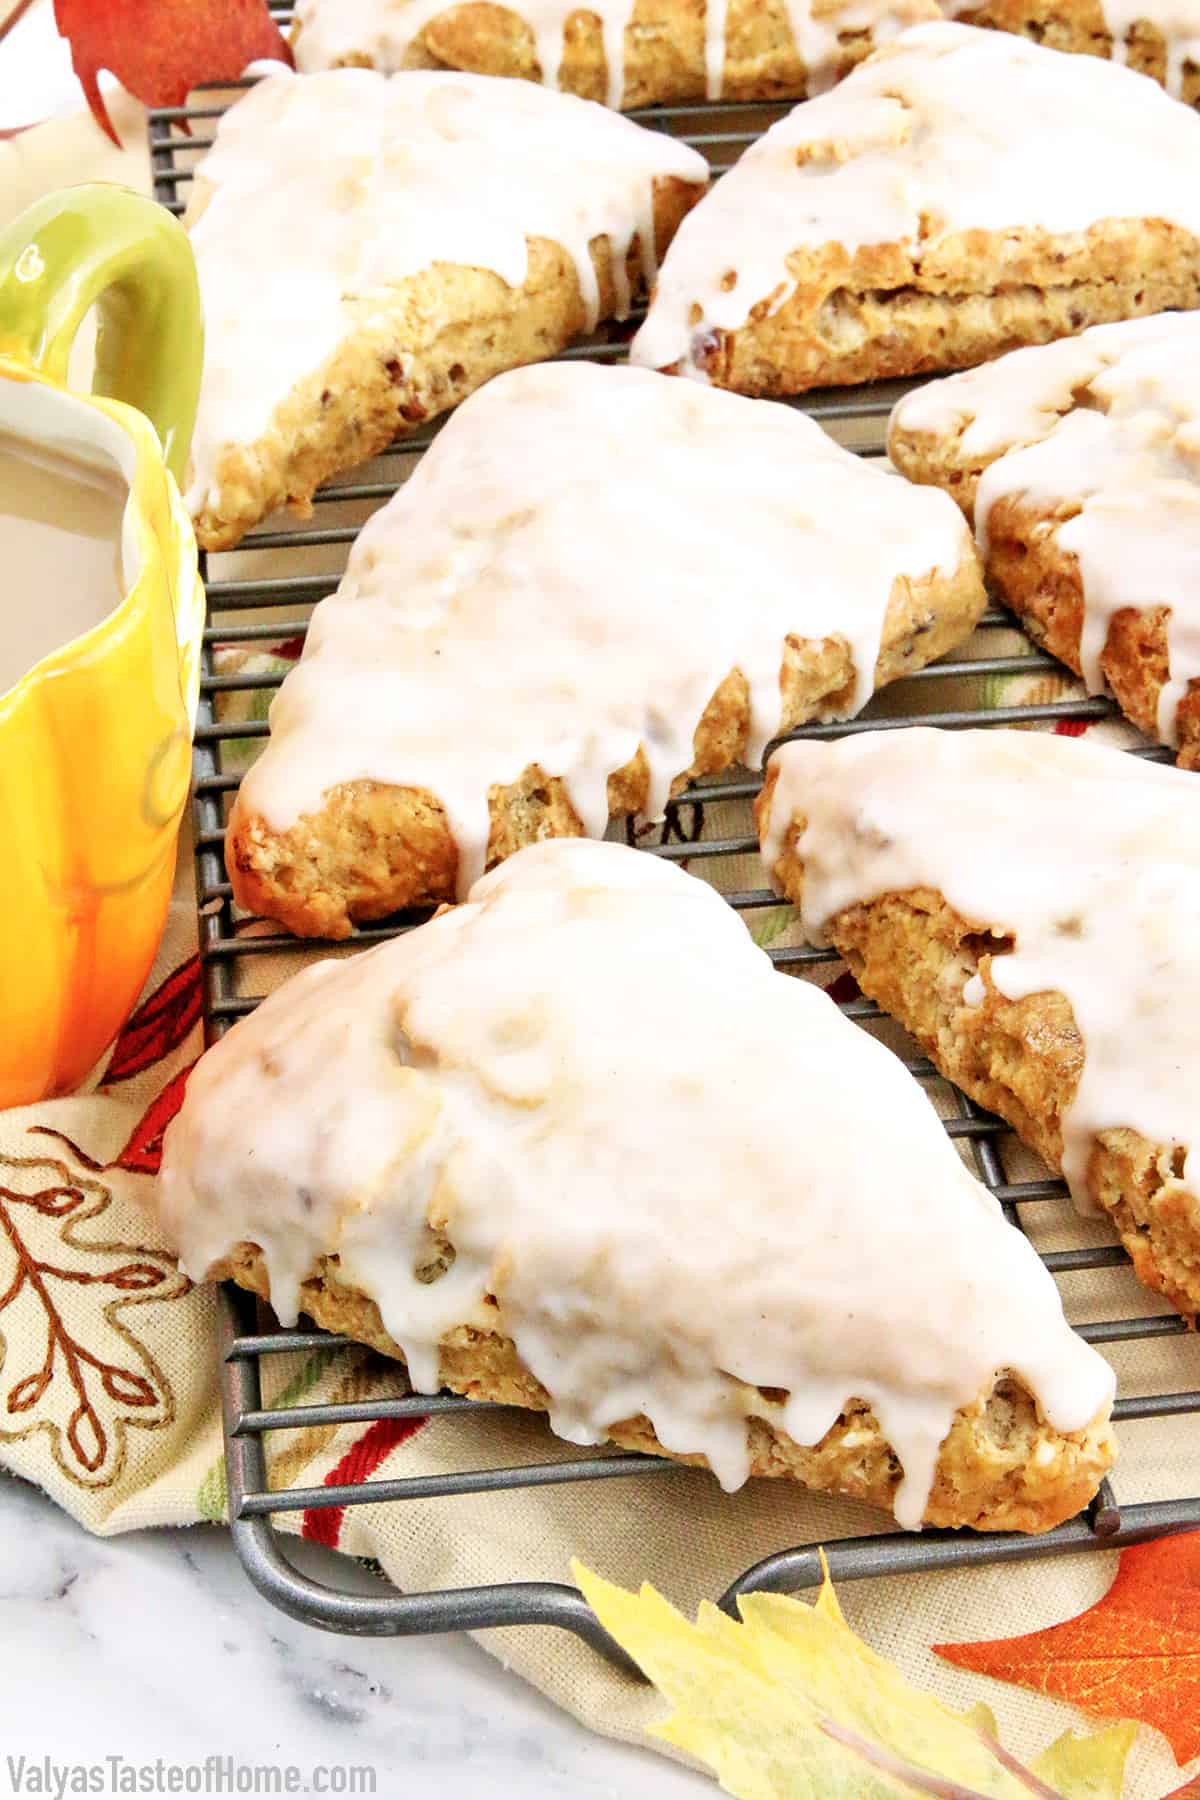 The Best Pumpkin Scones Fall is one of the best seasons for desserts! Cinnamon, maple, pecan, and pumpkin are just a few of my favorite fall flavors to play with! When the leaves start changing their color, and the cooler autumn weather with its crisp air remind us that the cold is coming, it's time to cozy up with a blanket and one of these delicious heartwarming treats in The Best Fall Dessert Recipes collection and a cup of my favorite homemade hot vanilla caramel latte.